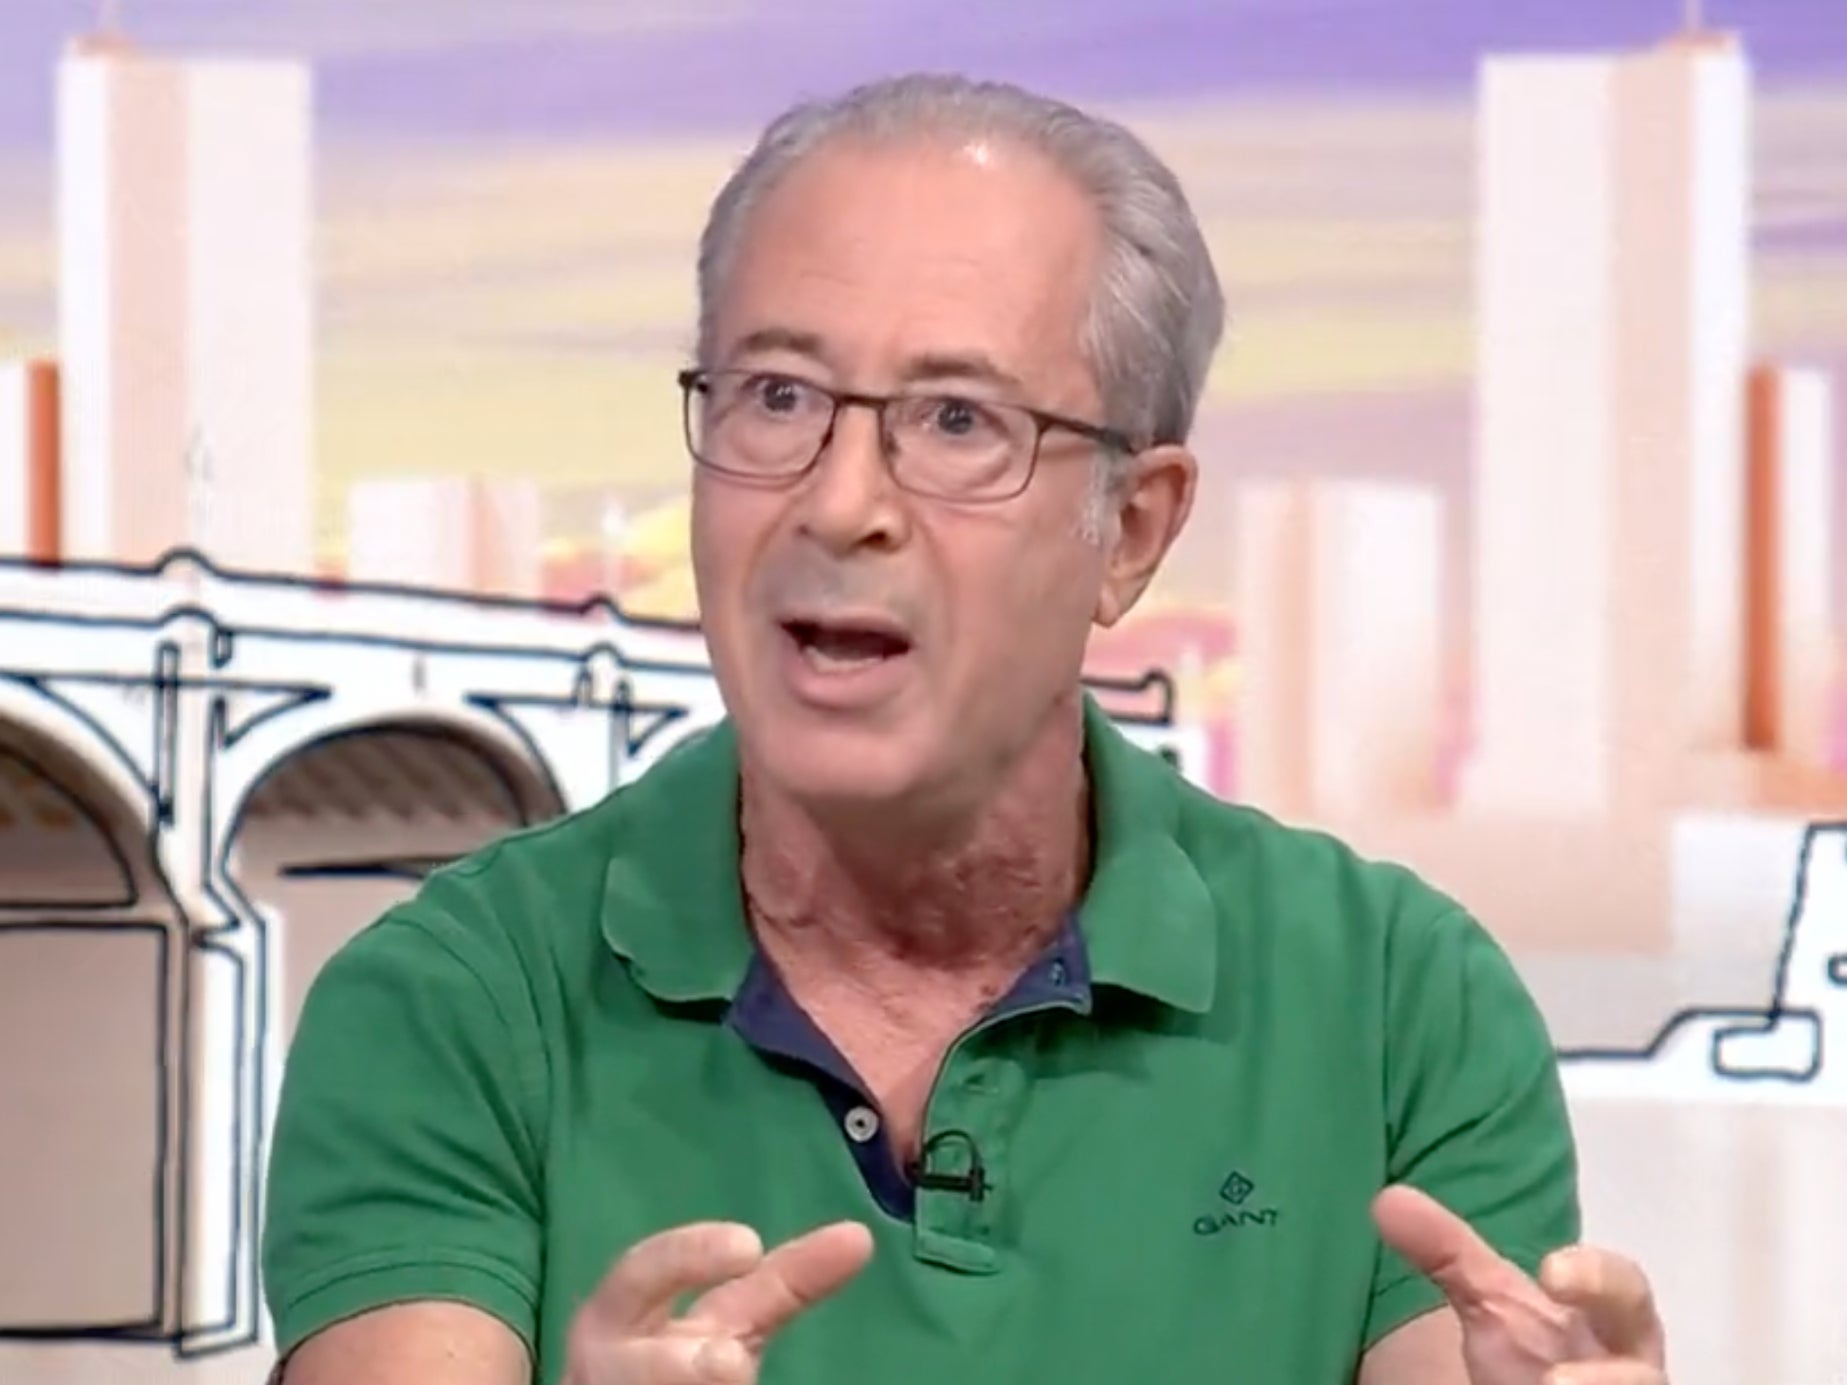 Ben Elton ’recommended’ voters kick out Tories